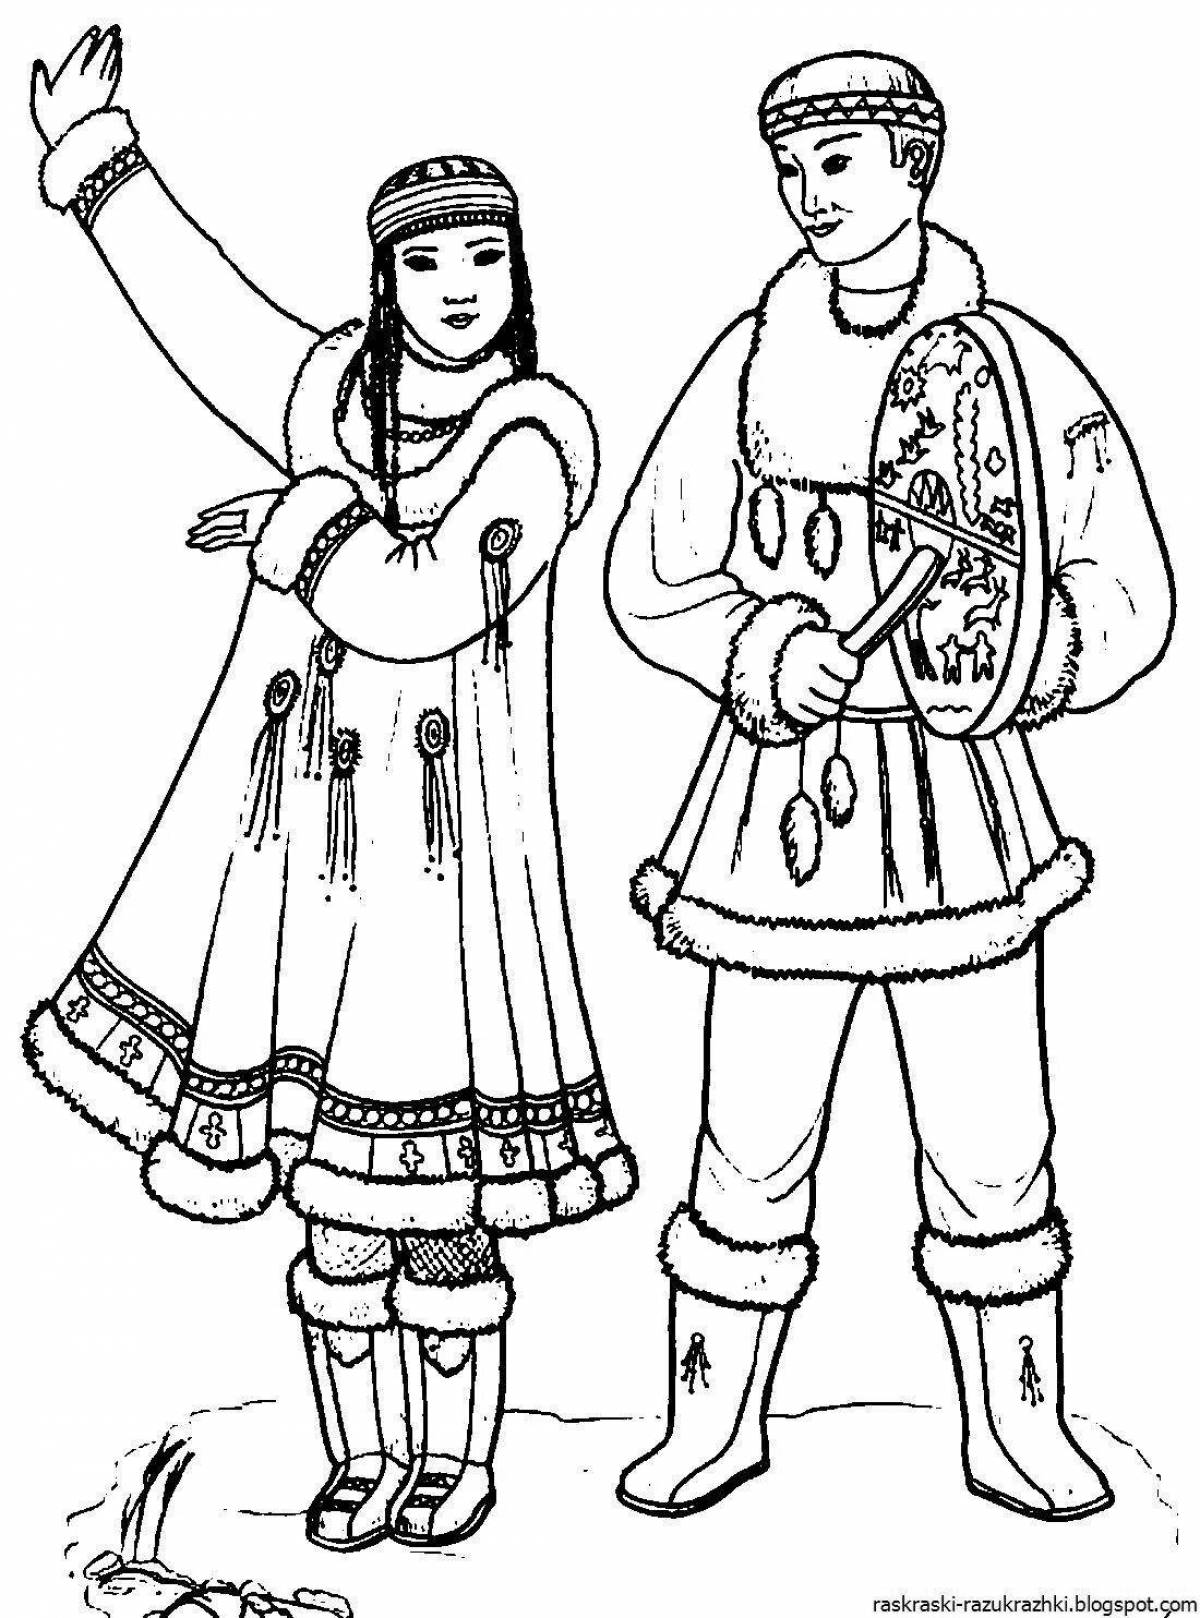 A fascinating coloring book in national costume